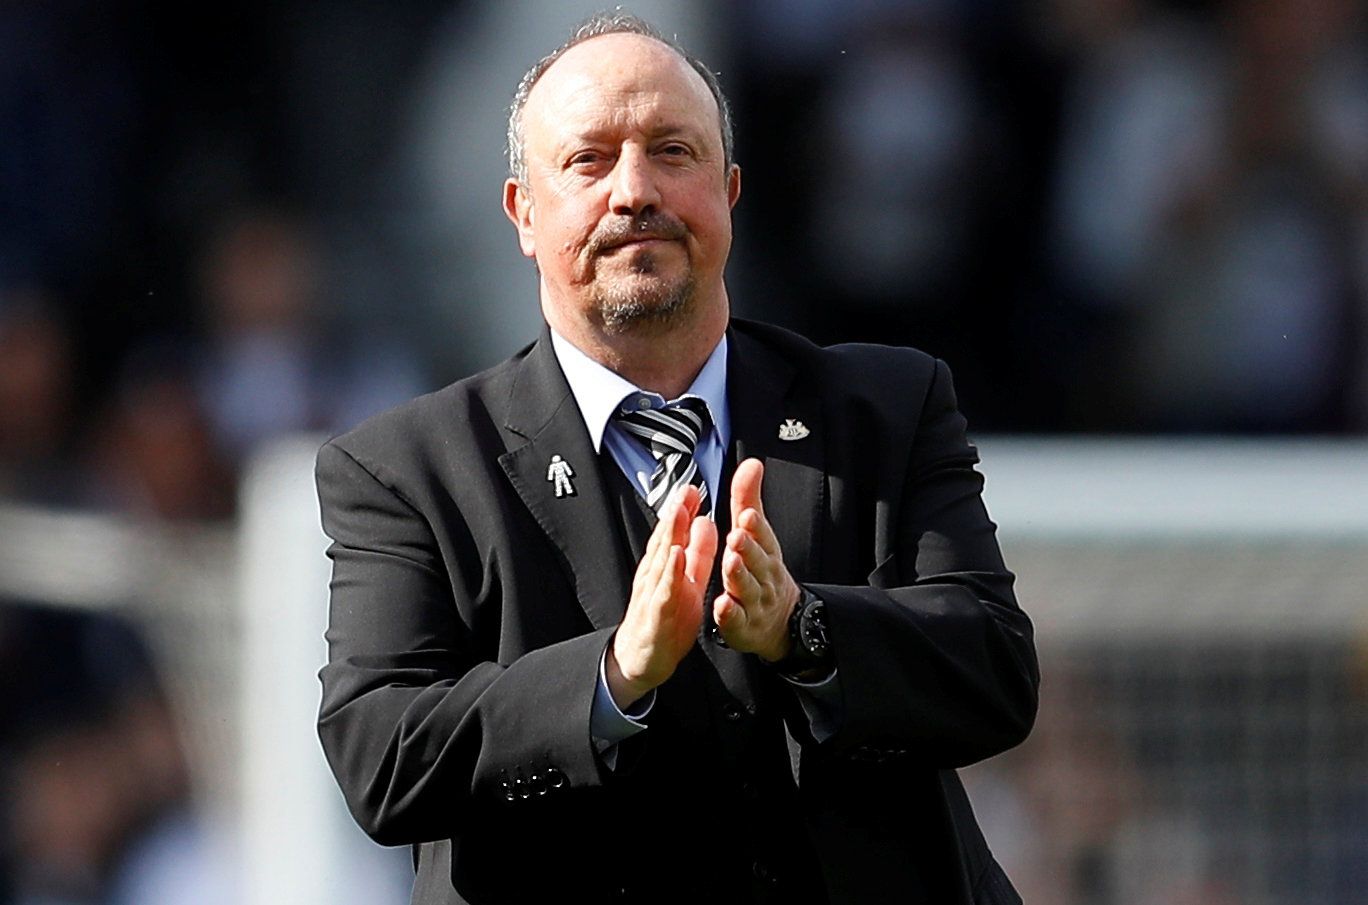 Soccer Football - Premier League - Fulham v Newcastle United - Craven Cottage, London, Britain - May 12, 2019  Newcastle United manager Rafael Benitez applauds the fans after the match   REUTERS/Peter Nicholls  EDITORIAL USE ONLY. No use with unauthorized audio, video, data, fixture lists, club/league logos or 